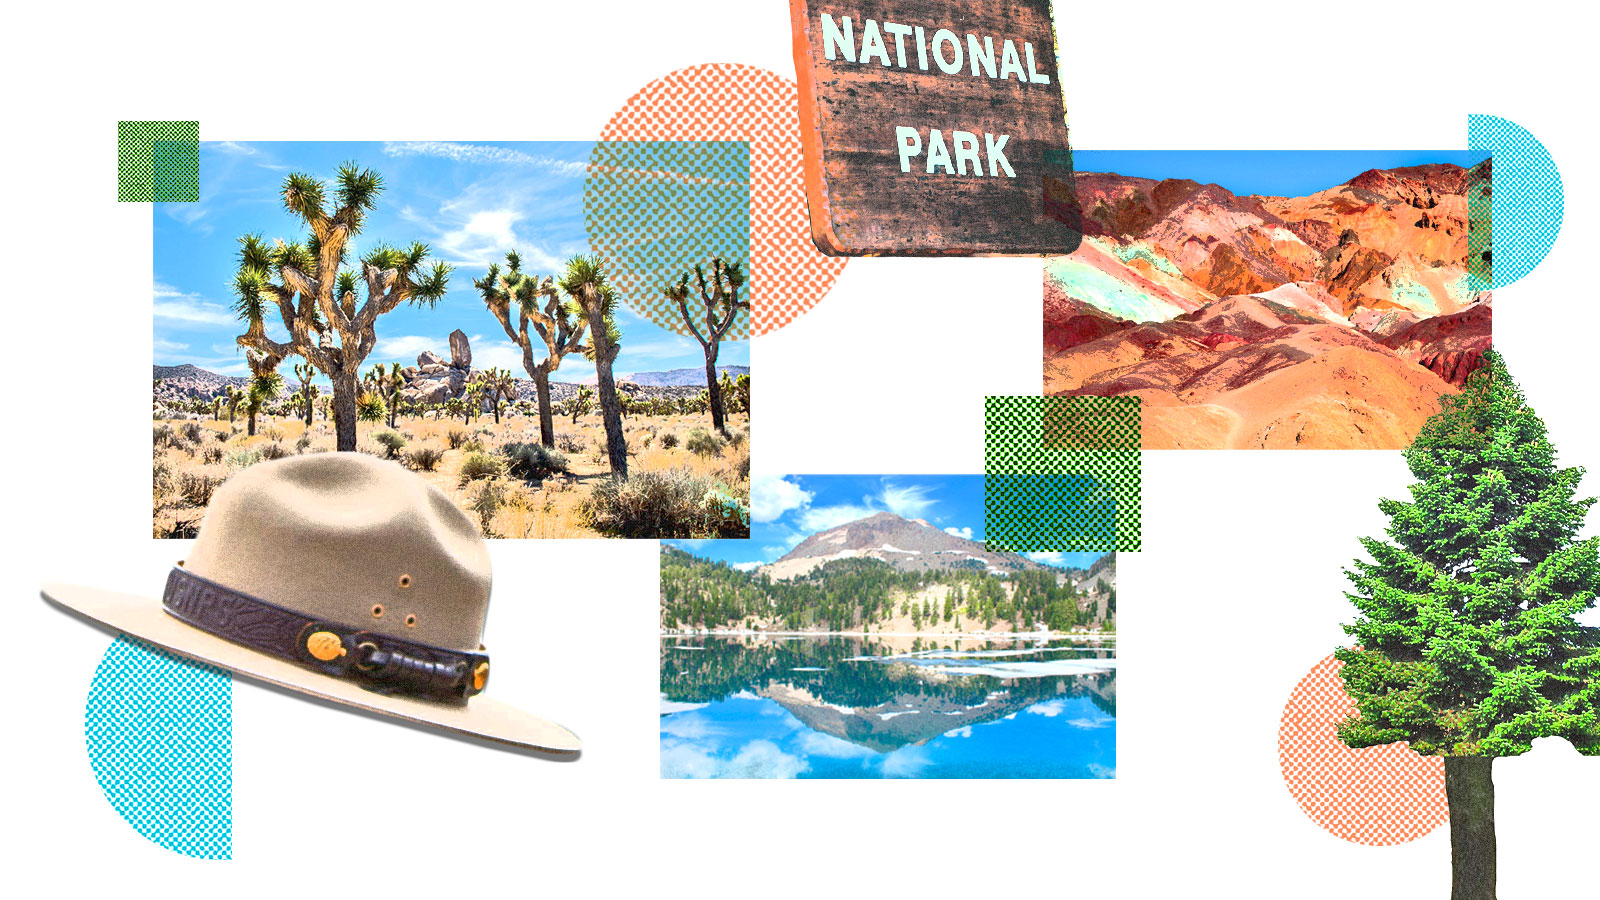 A photo collage of pictures of various national parks, with a national park sign, a ranger hat, and a fir tree.